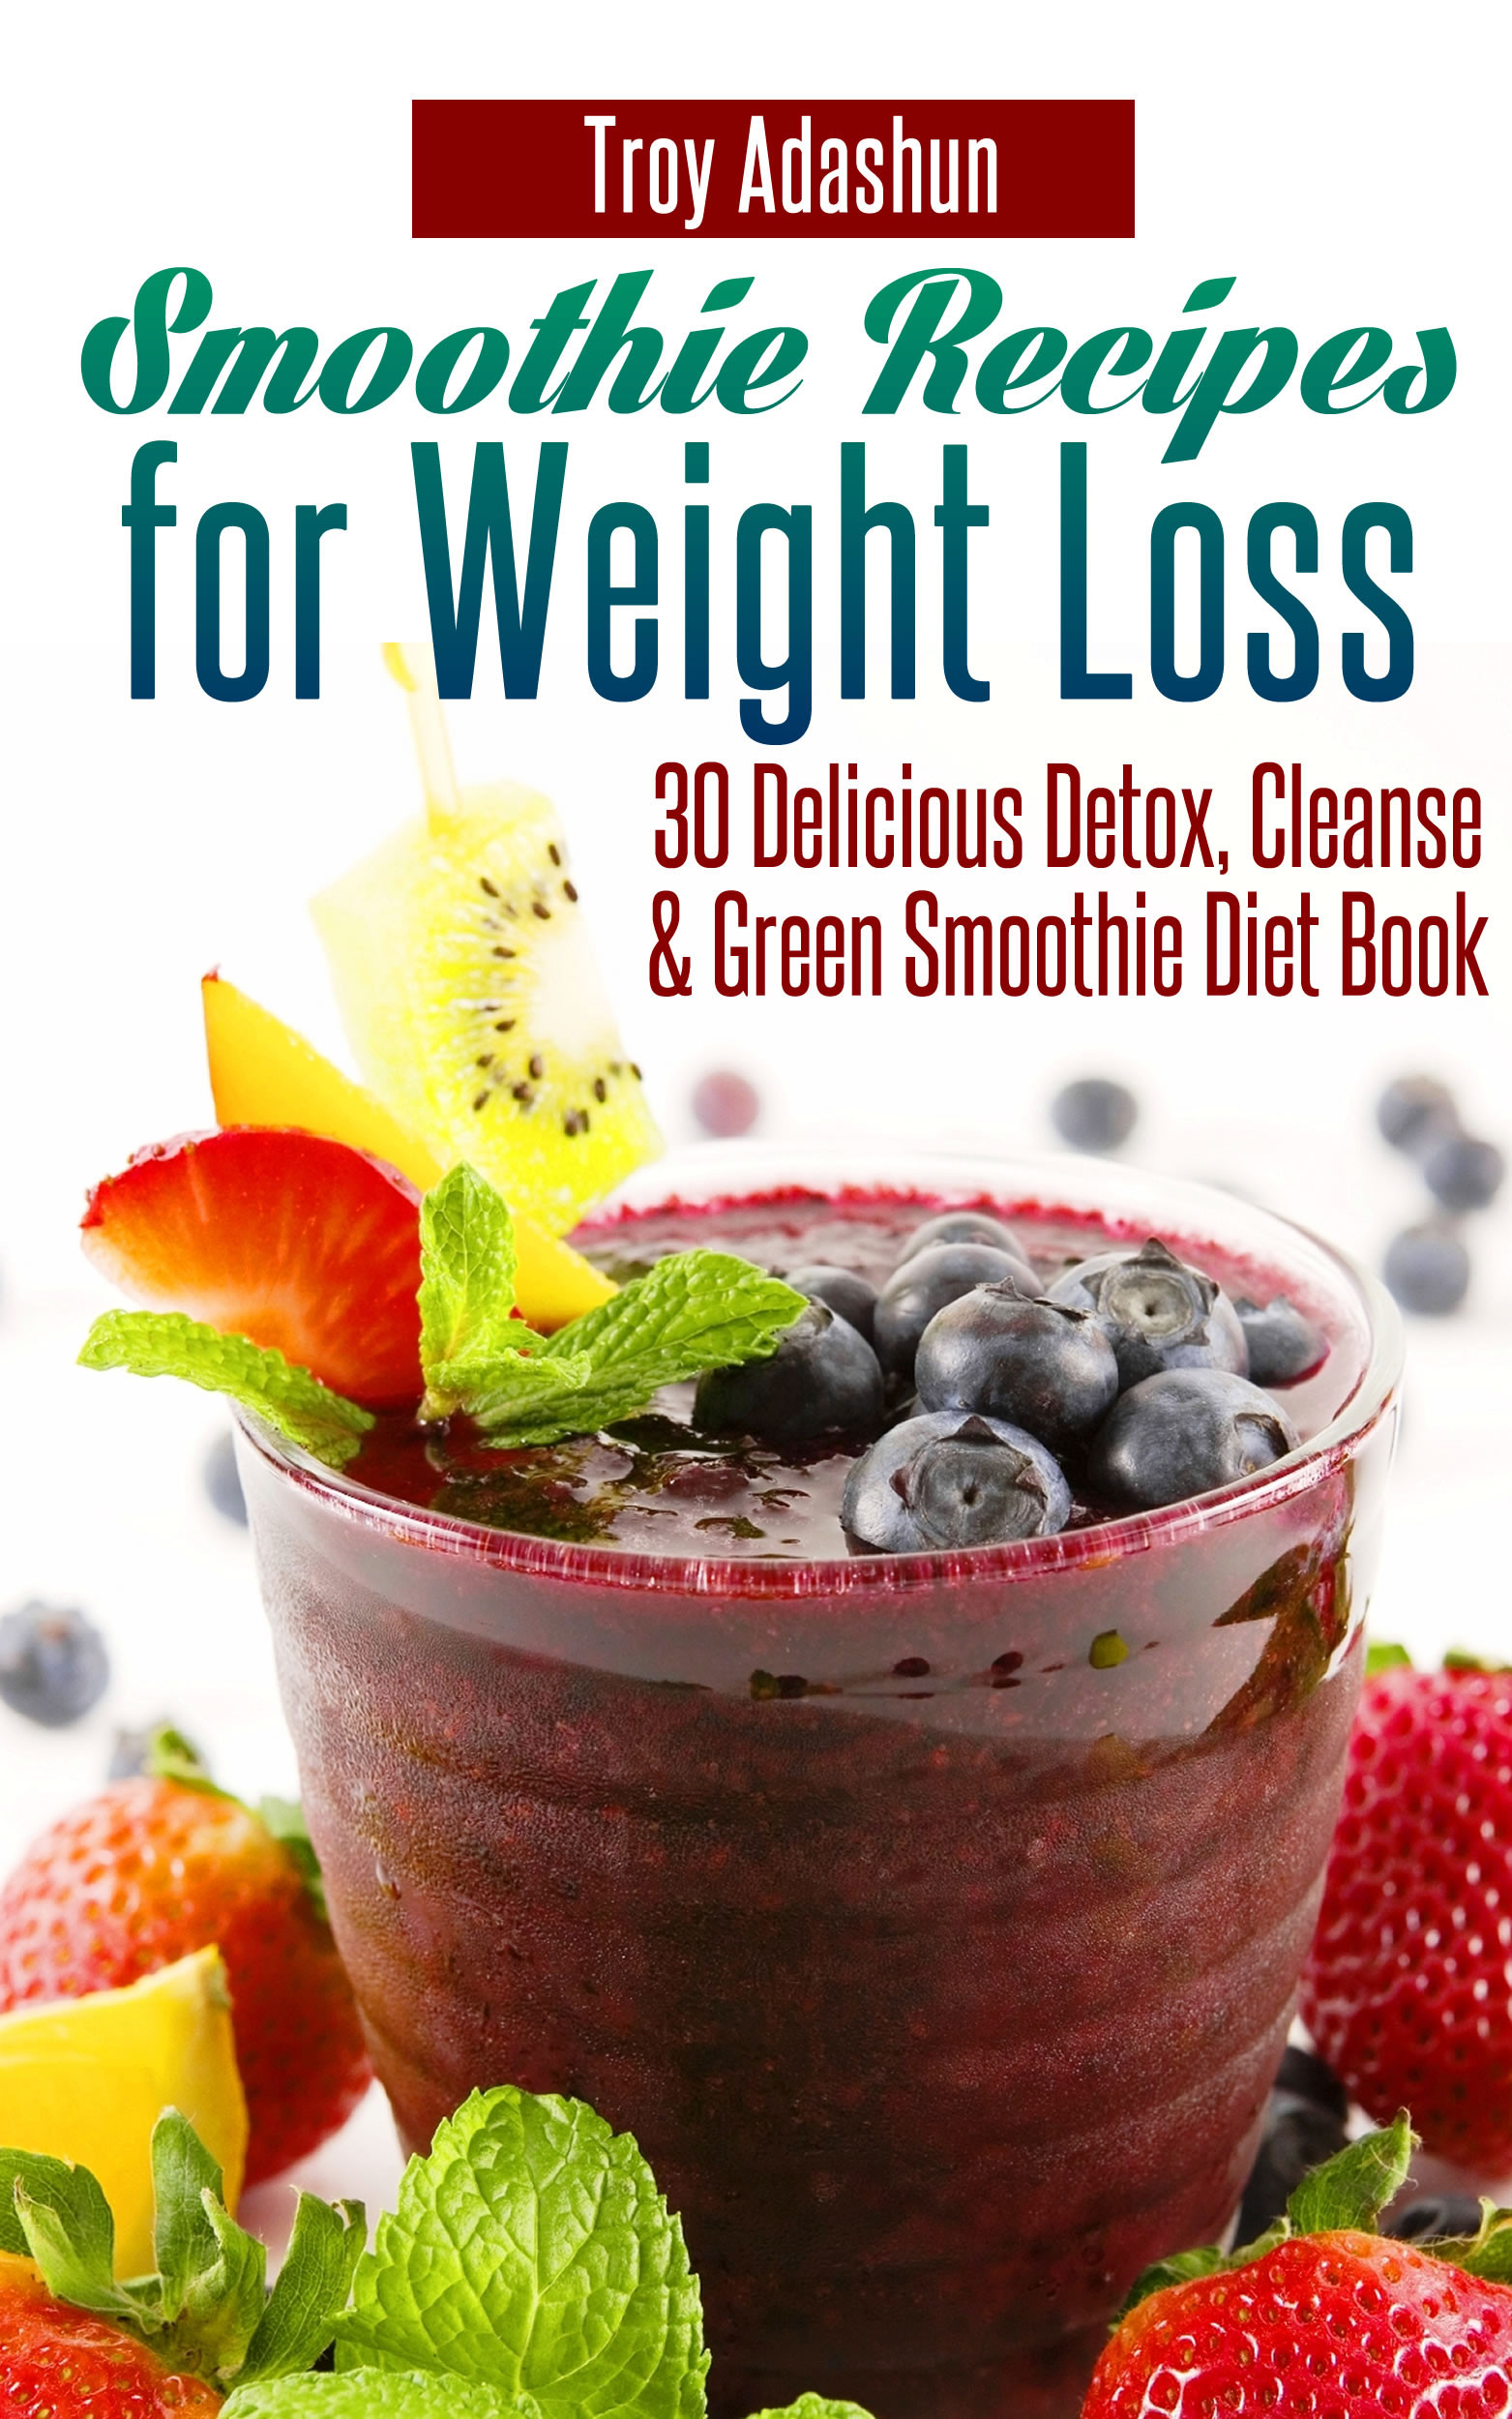 Diet Smoothie Recipes
 Smashwords – Smoothie Recipes for Weight Loss 30